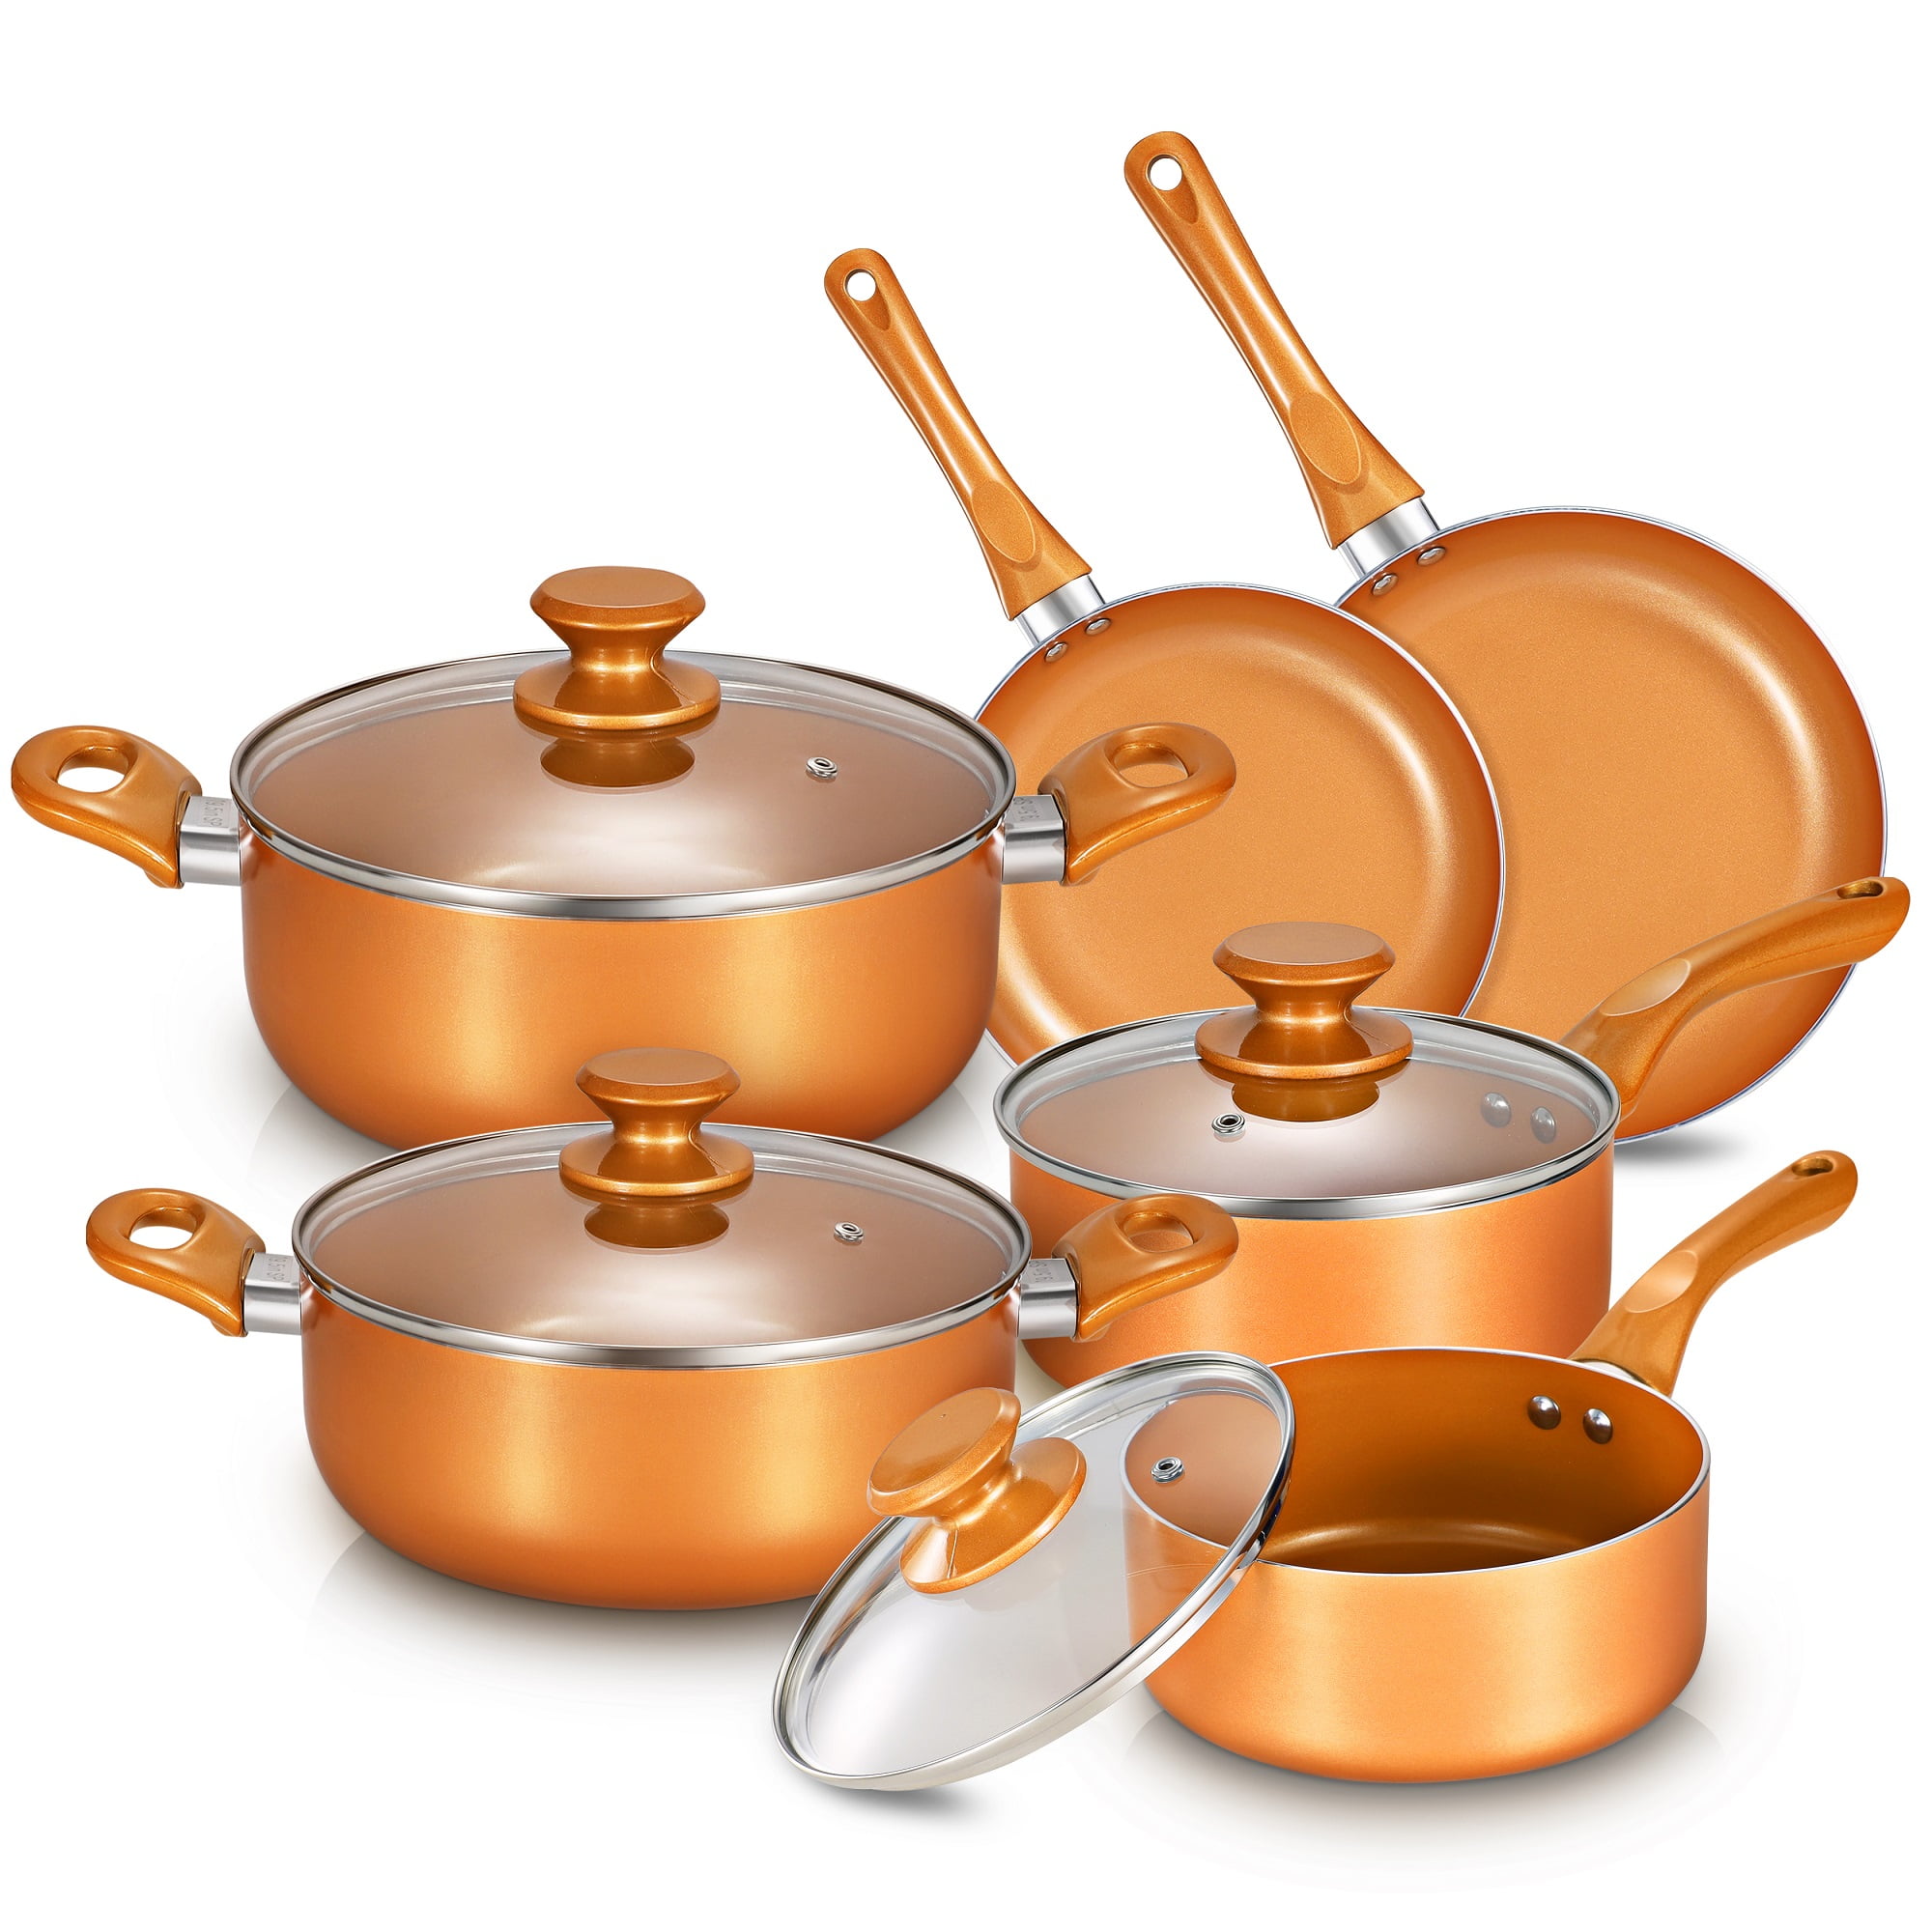 Nonstick Cookware Set, Pots and Pans Set, Ceramic Coating Saucepan for  Cooking, Stock Pot with Lid, Frying Pan, Copper, 10 pieces